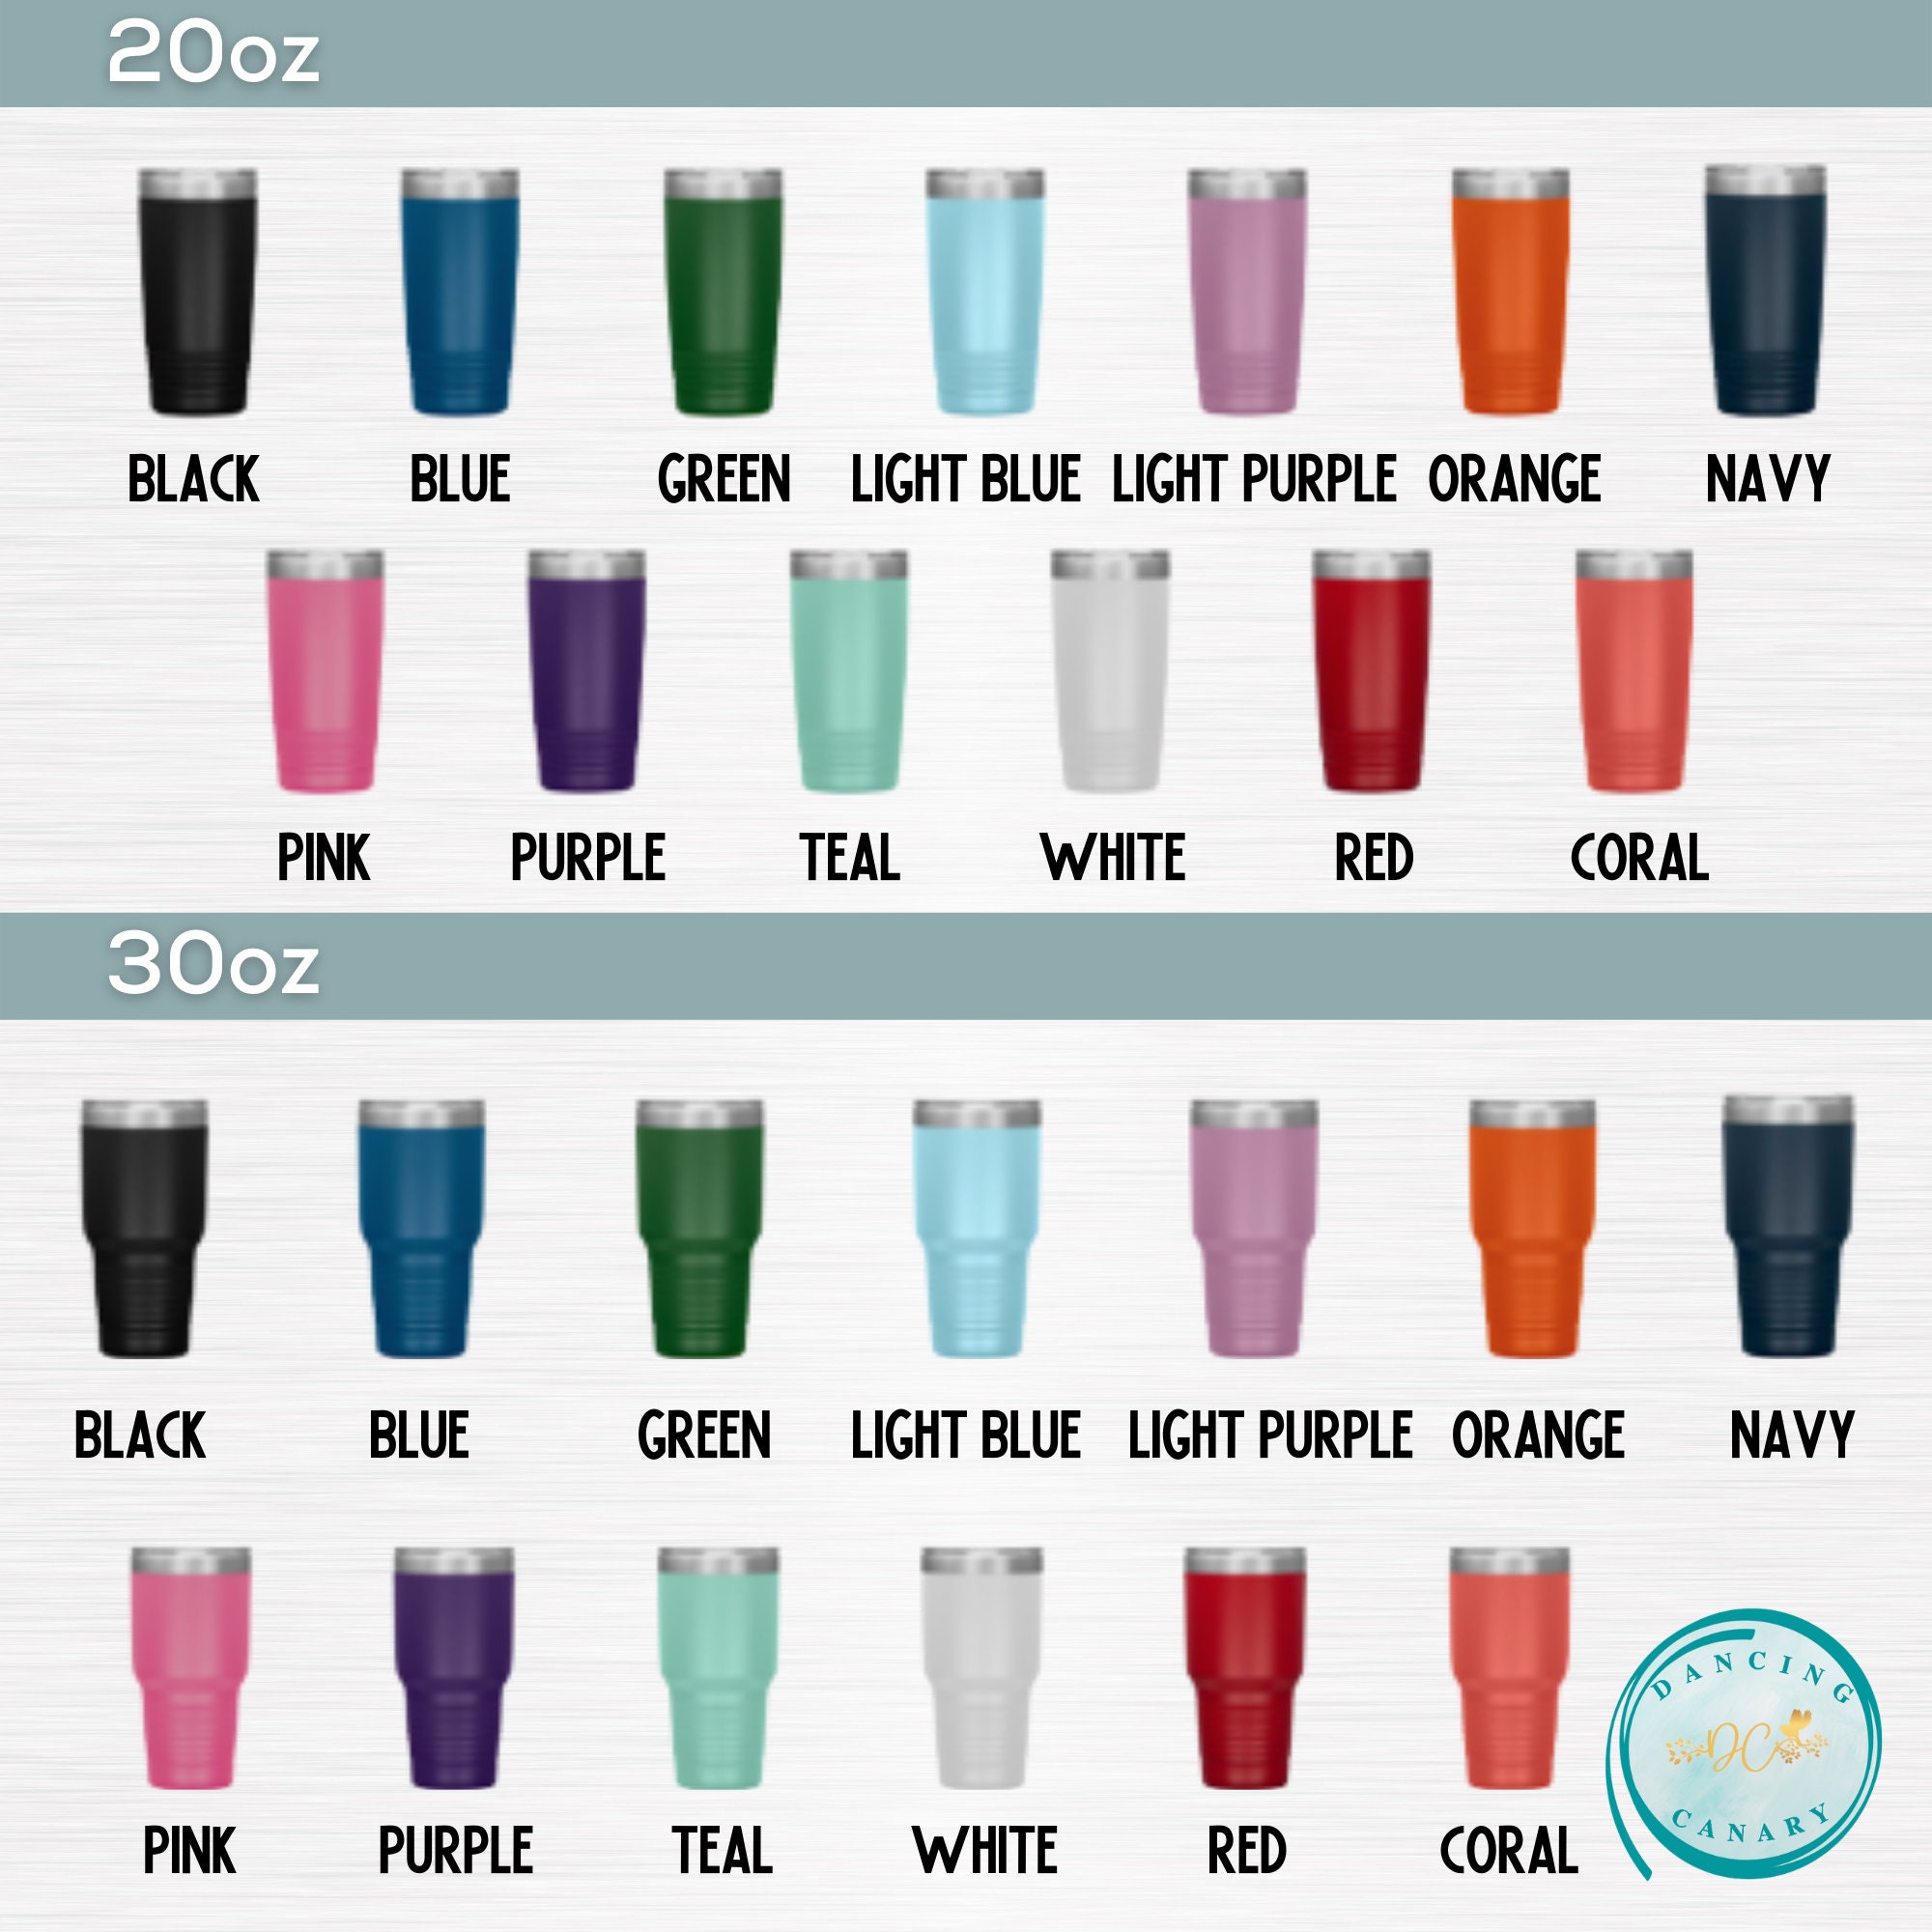 40th Birthday Gifts Men, 20 Oz Personalized Tumbler For Men 40th Birthday,  1983 Birthday Gifts For M…See more 40th Birthday Gifts Men, 20 Oz